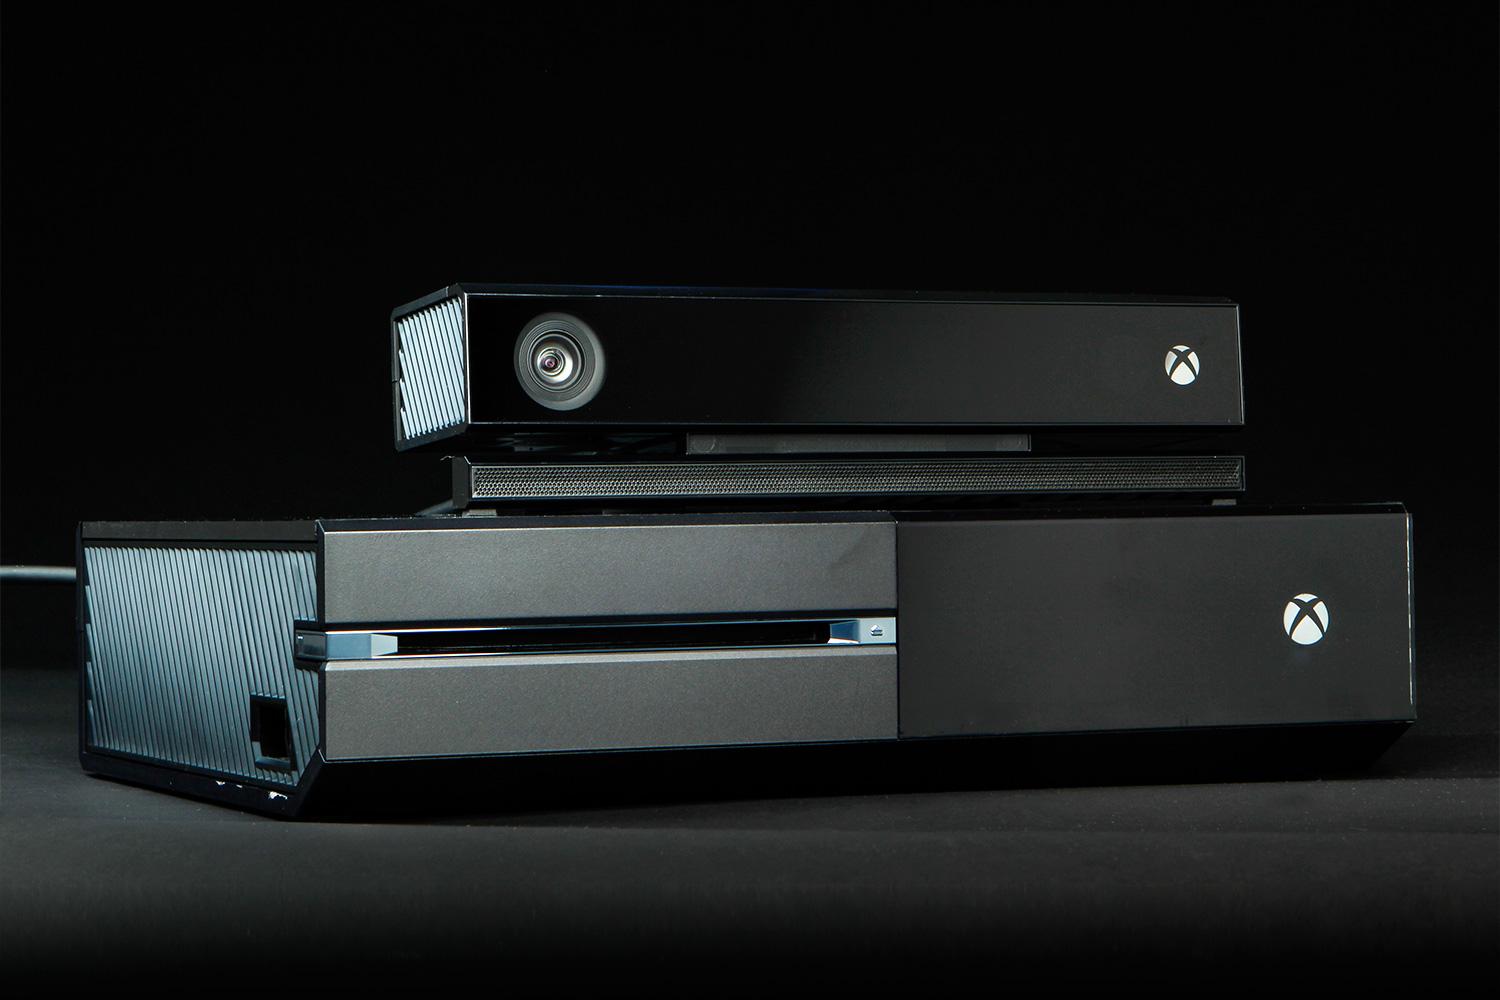 https://www.digitaltrends.com/wp-content/uploads/2013/11/microsoft-xbox-one-review-console-kinect1.jpg?fit=720%2C720&p=1